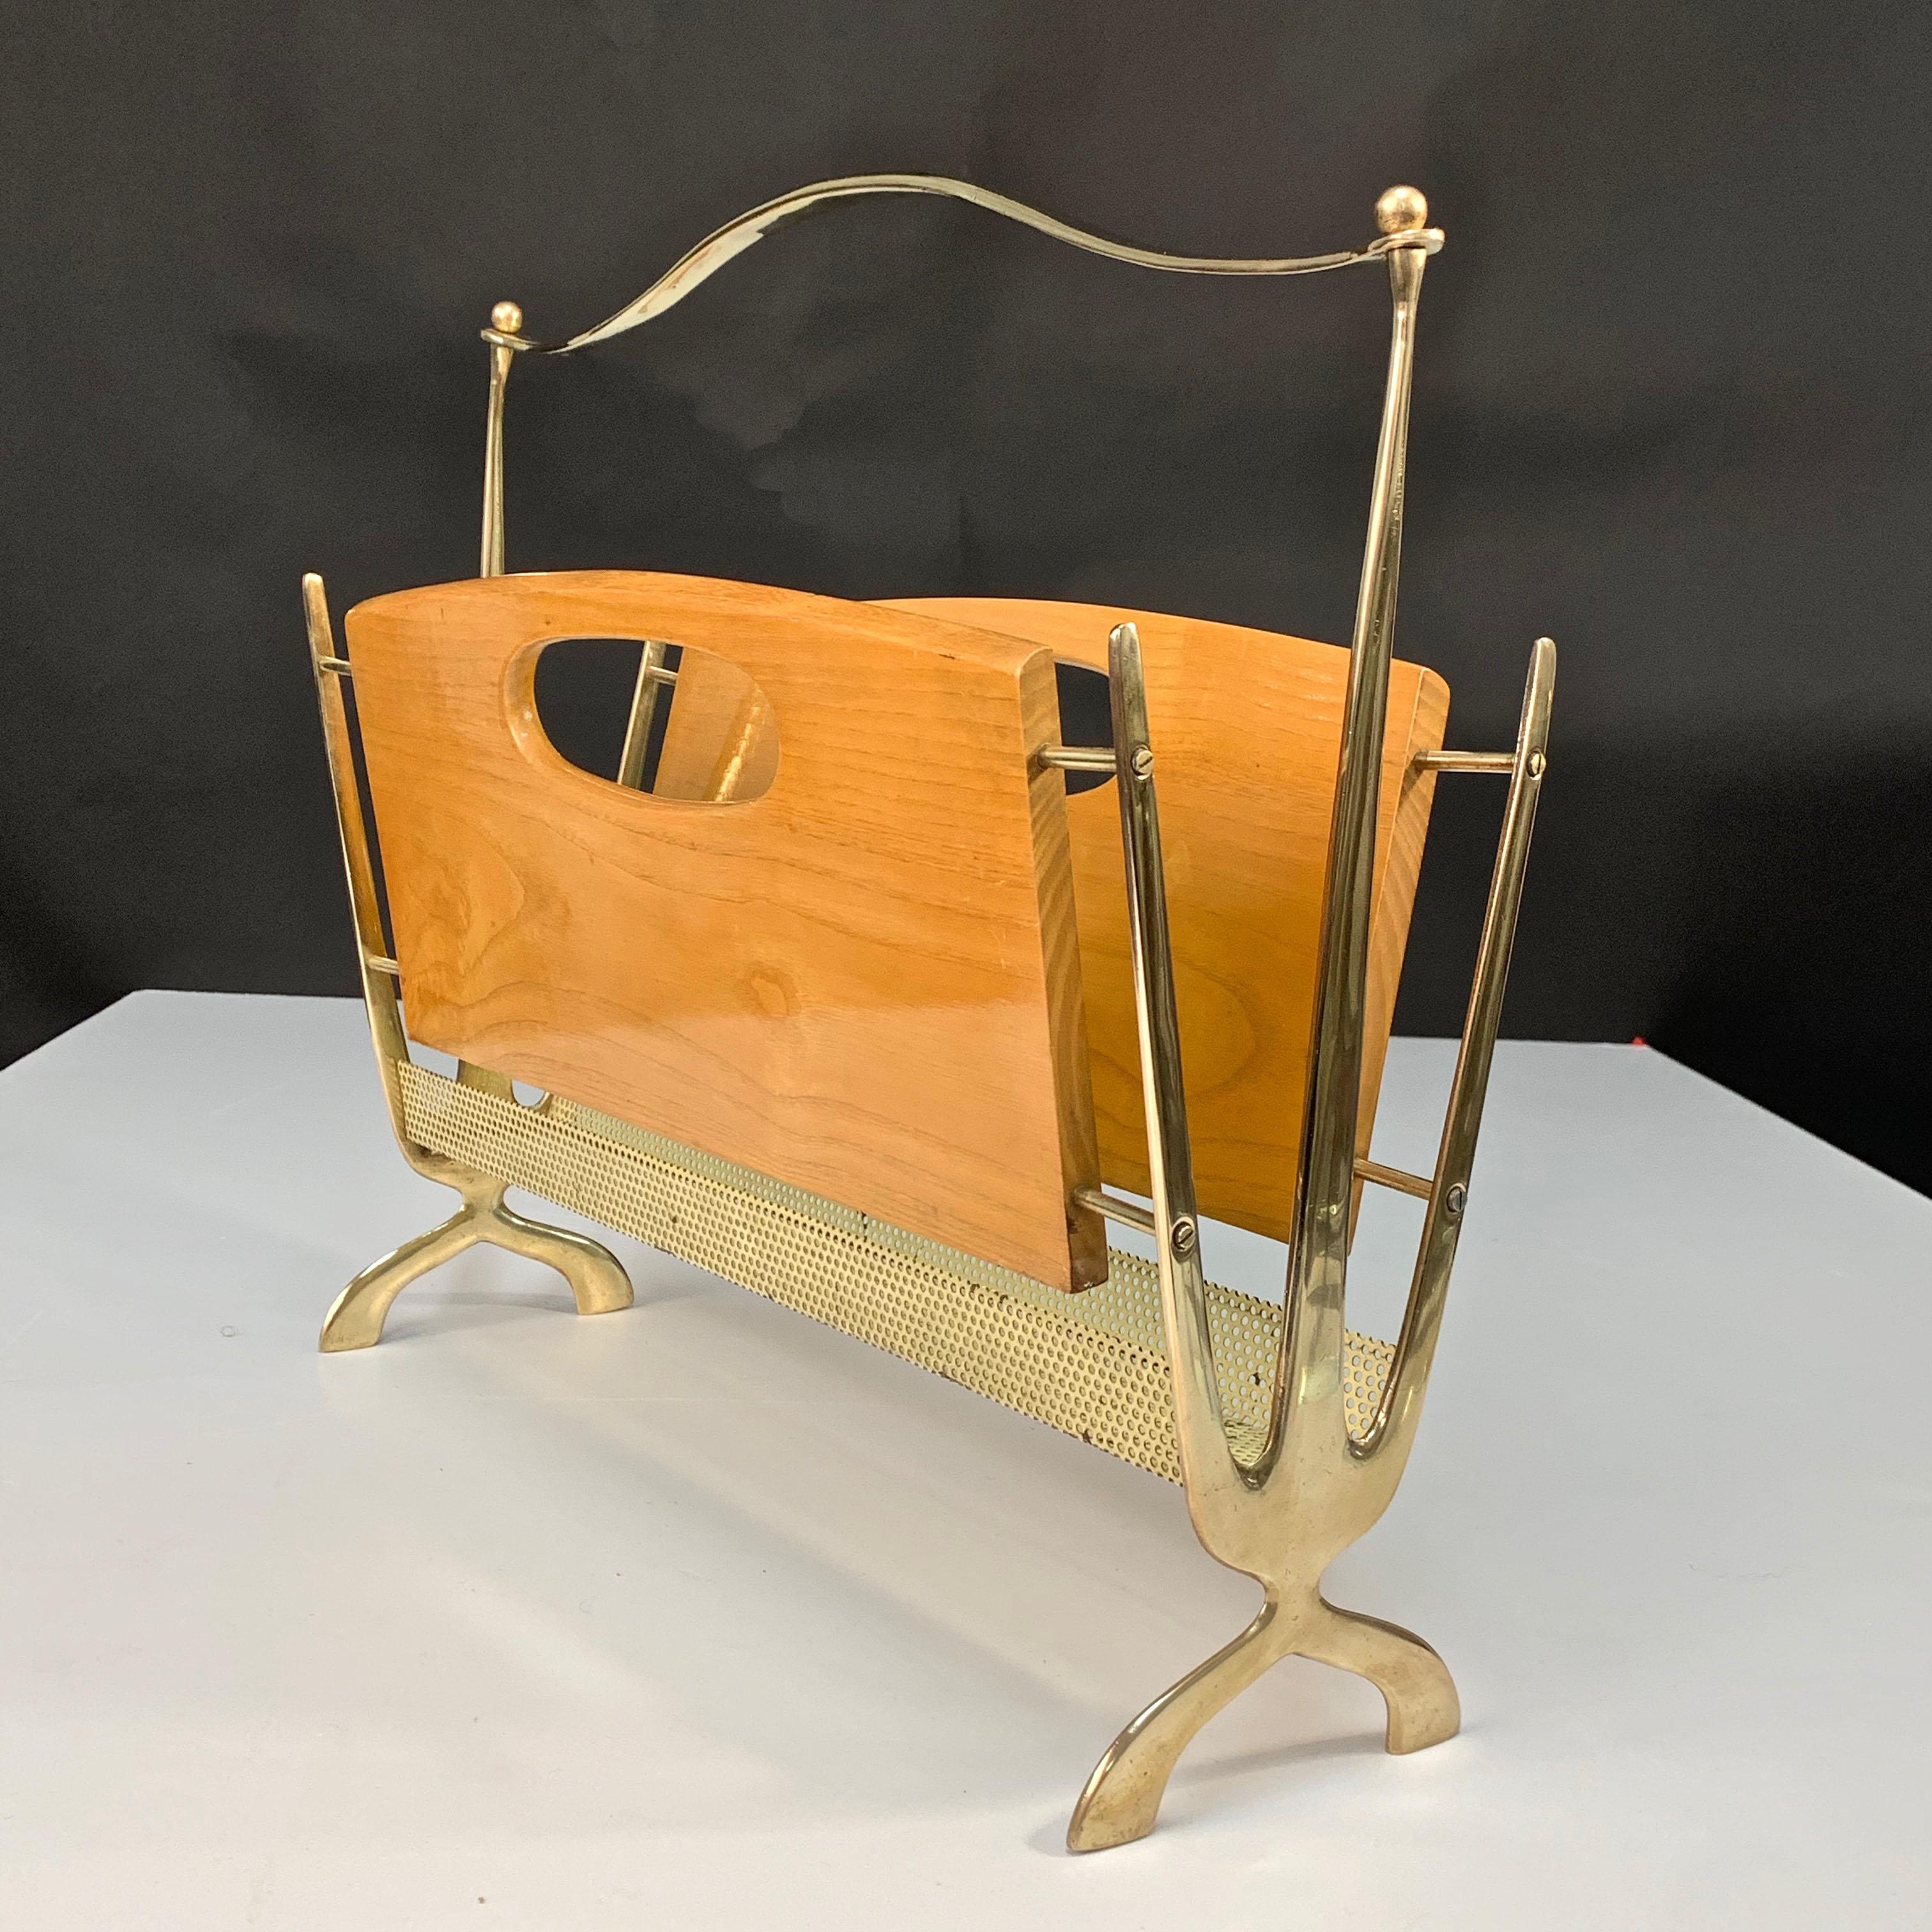 Maison Baguès Midcentury Brass and Chestnut Wood French Magazine Rack, 1950s In Good Condition For Sale In Roma, IT